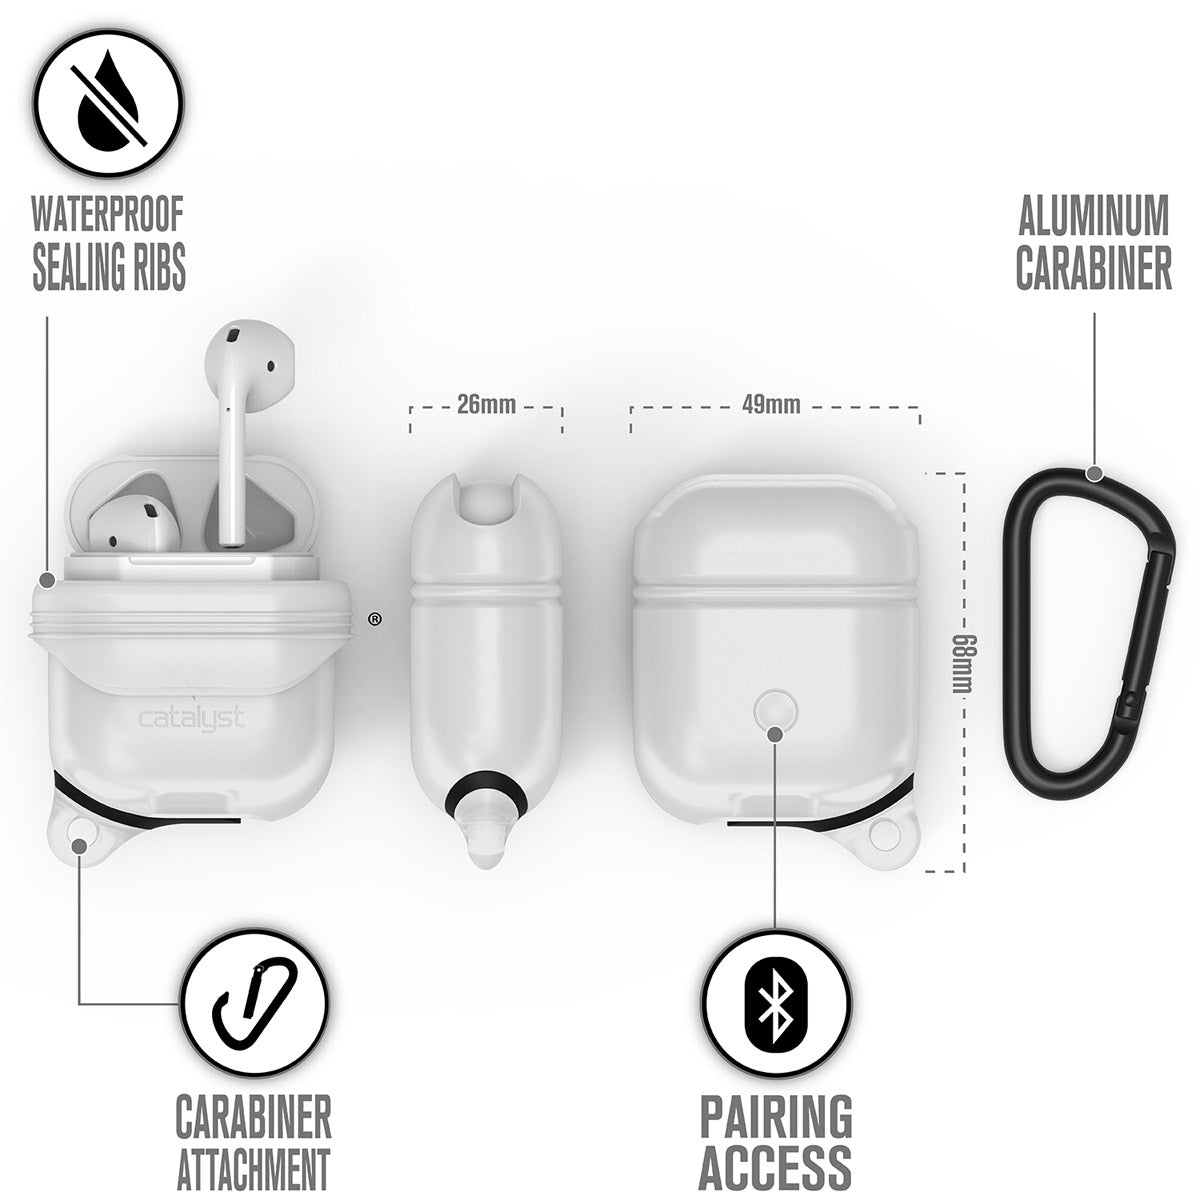 CATAPDWHT-FBA | Catalyst airpods gen2/1 waterproof case + carabiner showing the case dimension and features in frost white text reads waterproof sealing ribs aluminum carabiner pairing access carabiner attachment